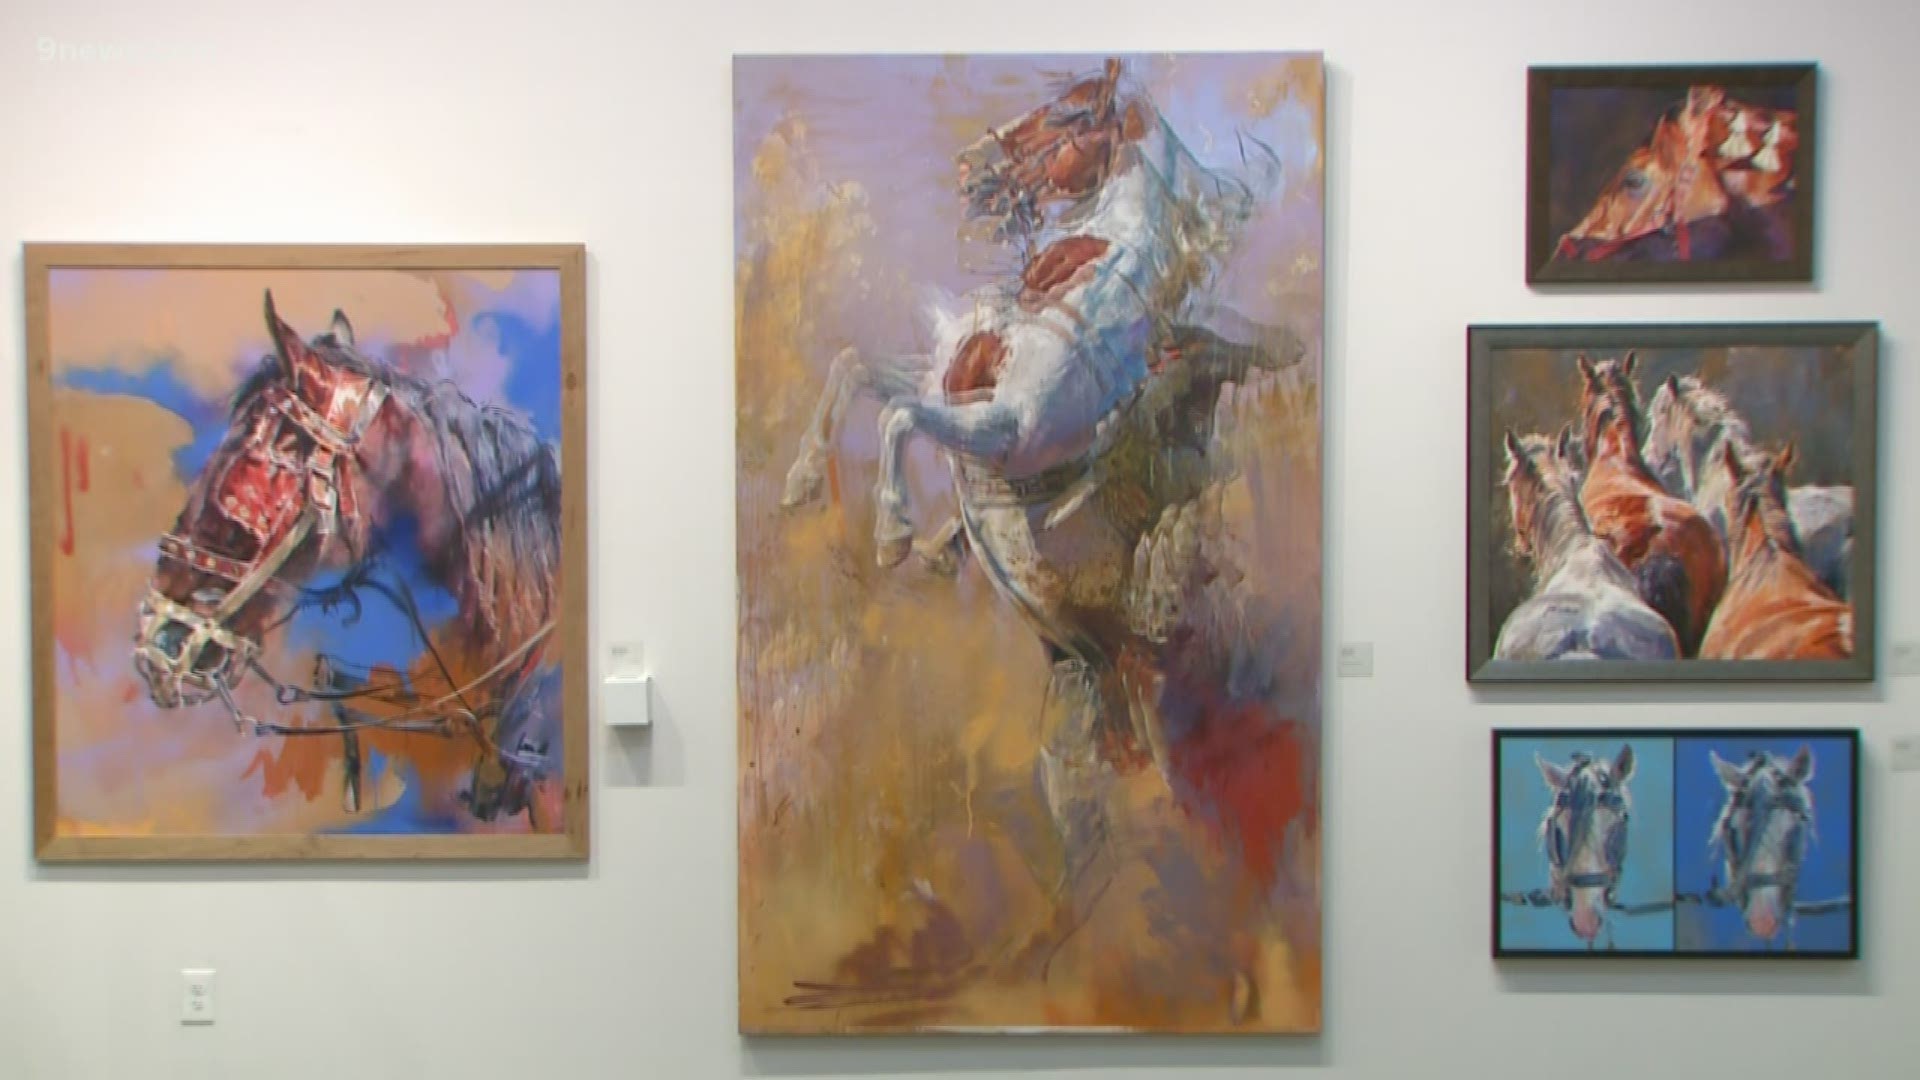 For nearly three decades, the Coors Western Art Exhibit & Sale has combined art and agriculture. Eddie Randle introduces us to this year's featured Artist.